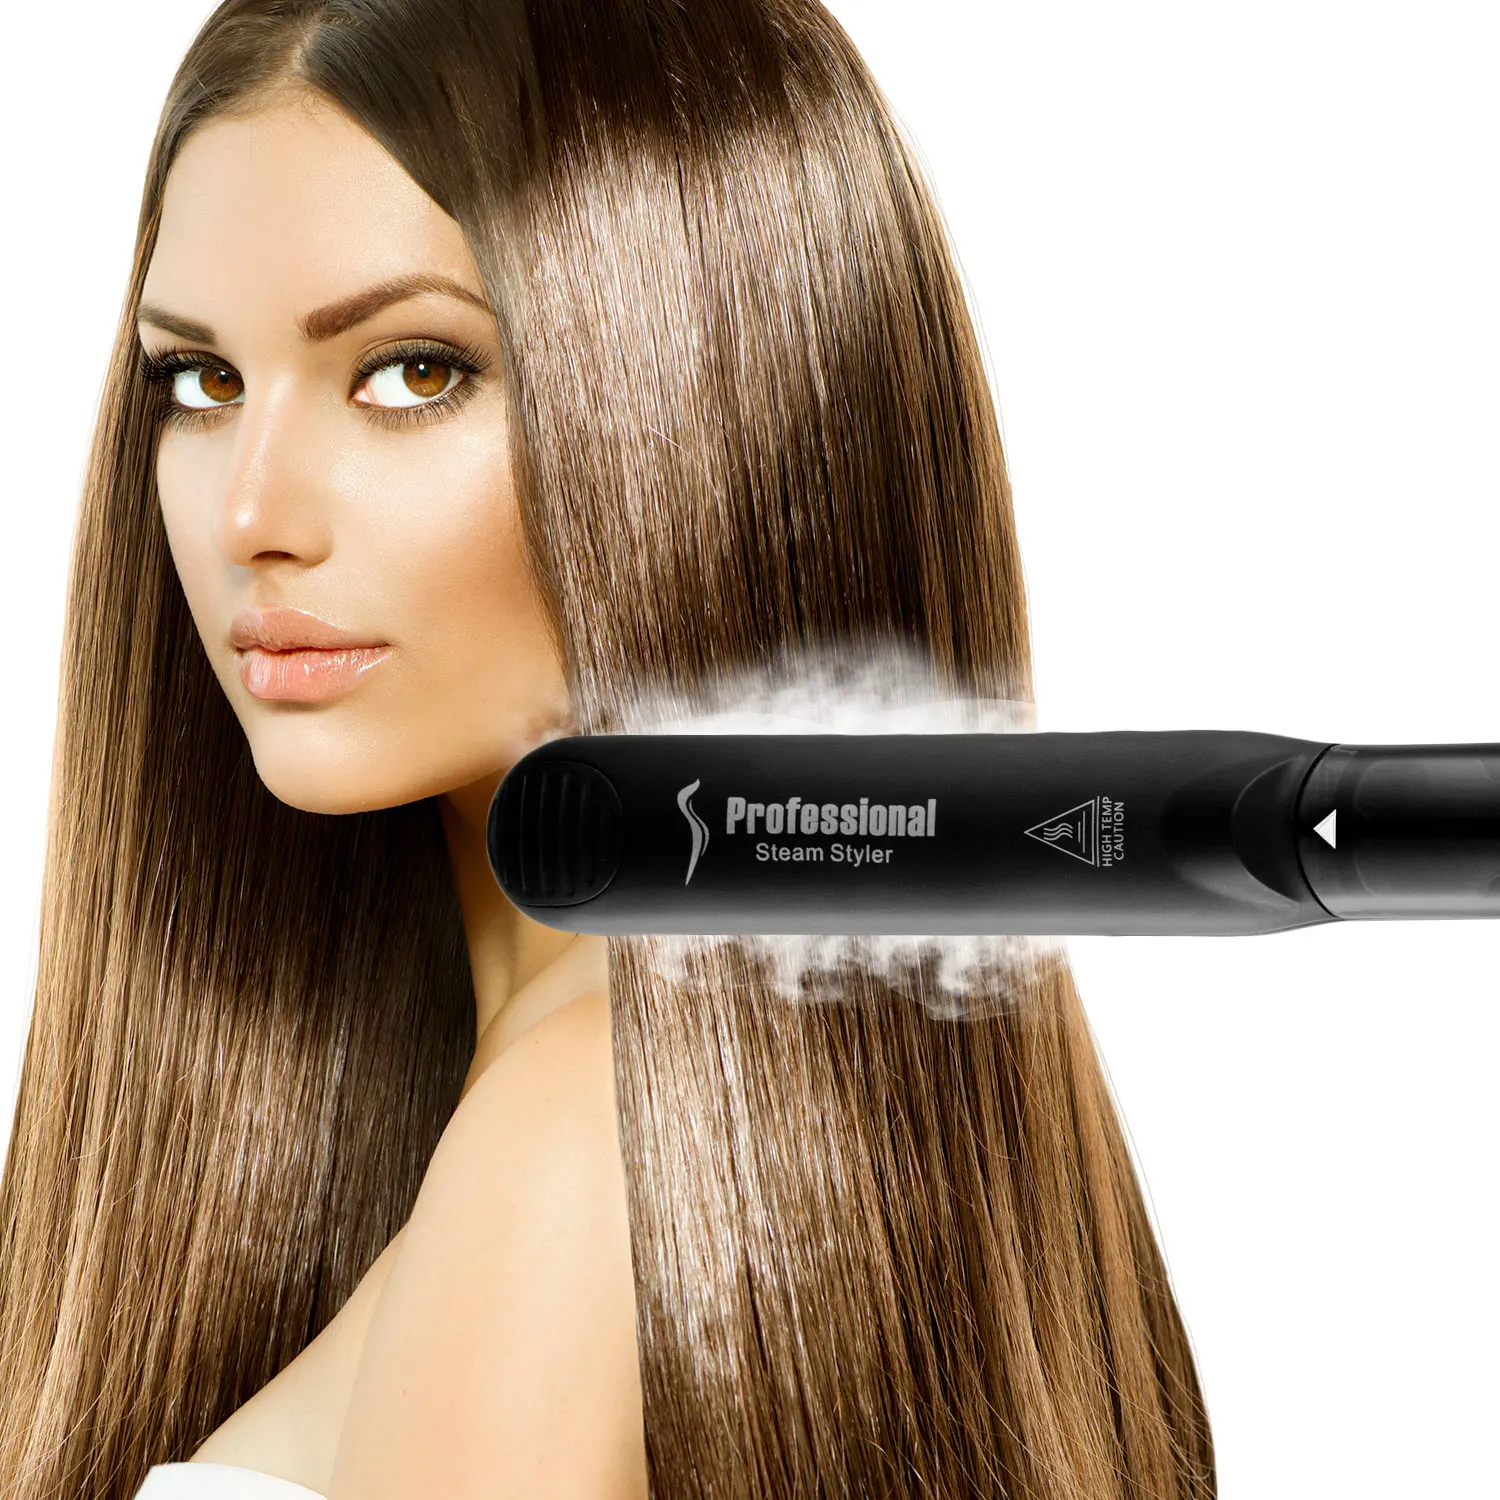 Ceramic hair straighteners with steam фото 118